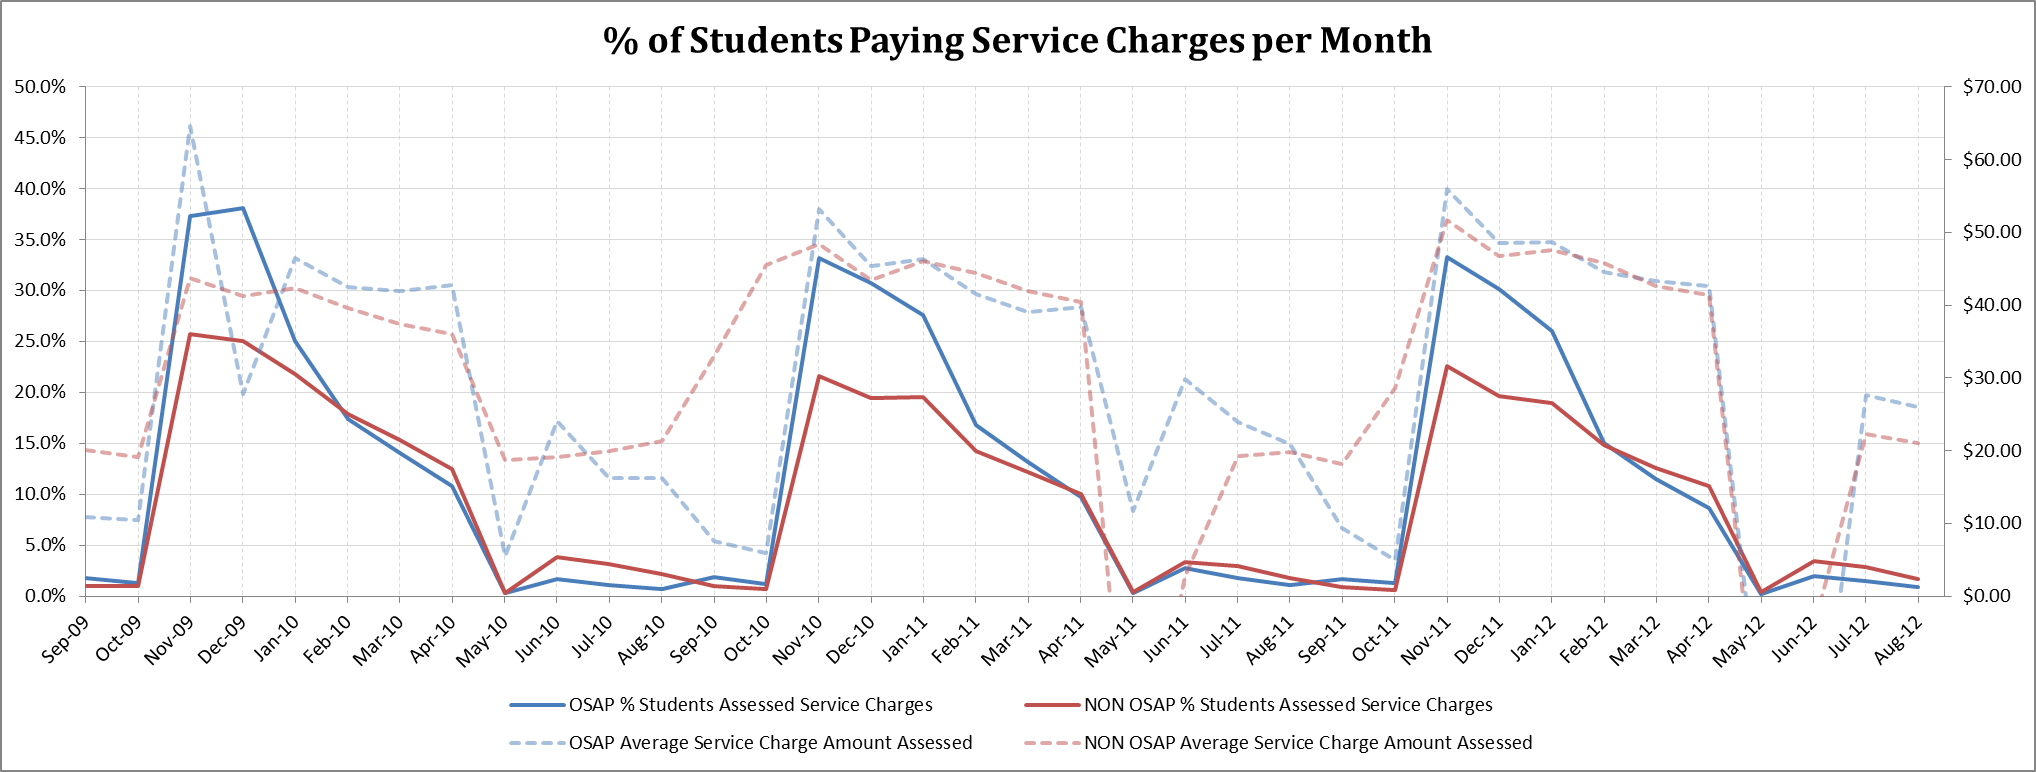 Percent of Students Paying Service Charges per Month